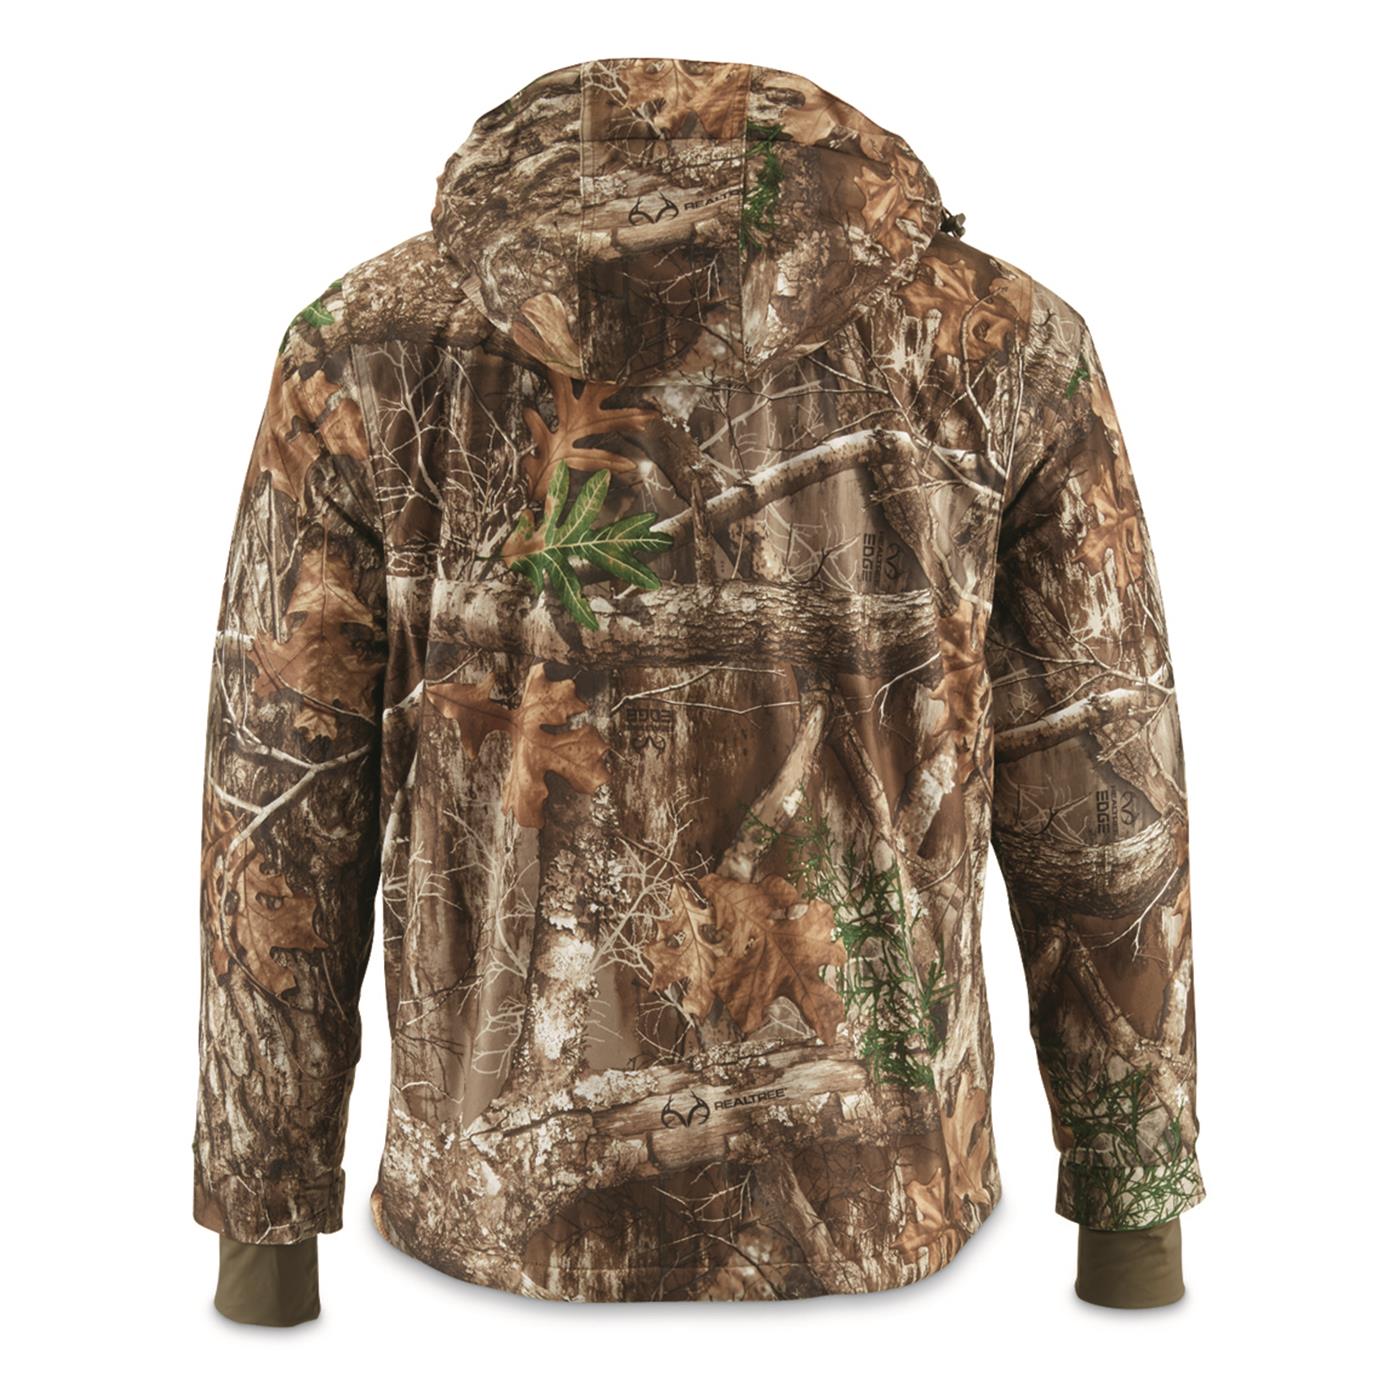 Guide Gear Men's Dry Hunting Parka, Insulated Waterproof Camo Hunt ...